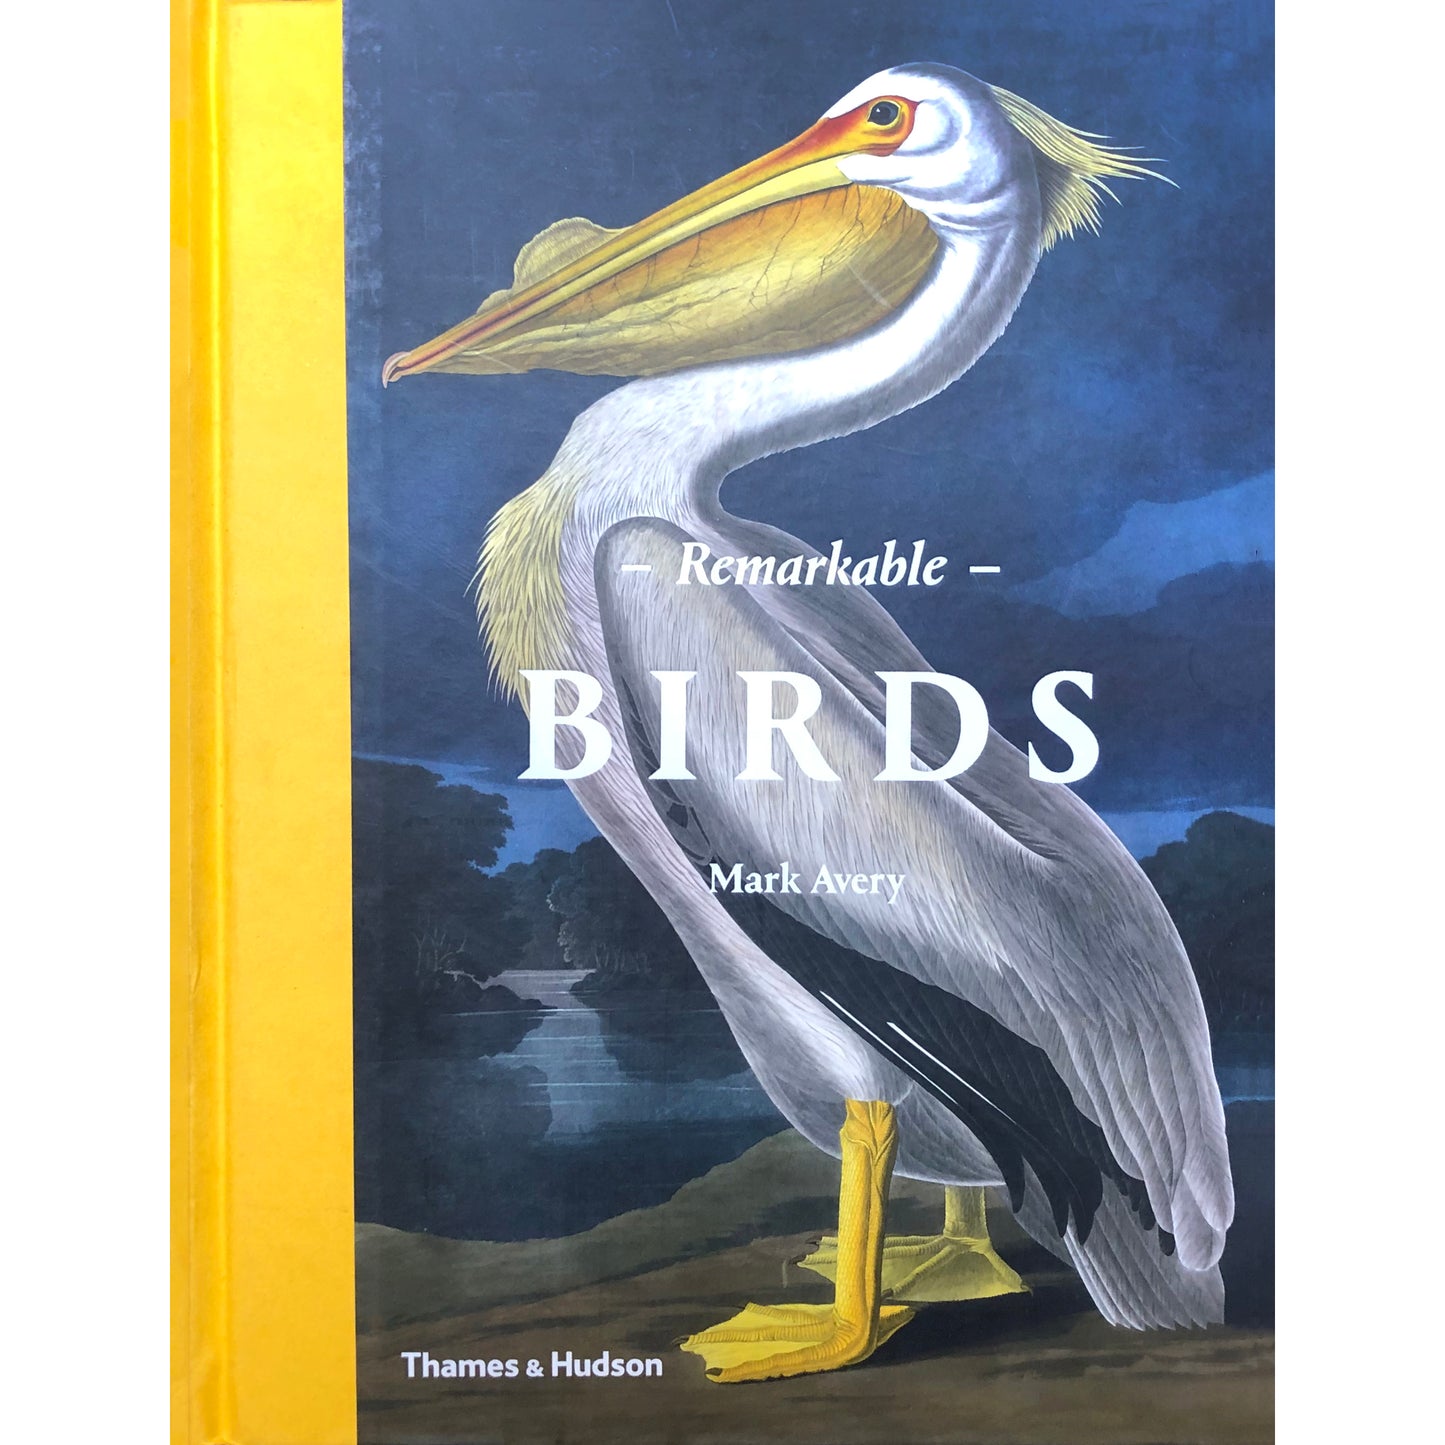 Remarkable Birds by Mark Avery